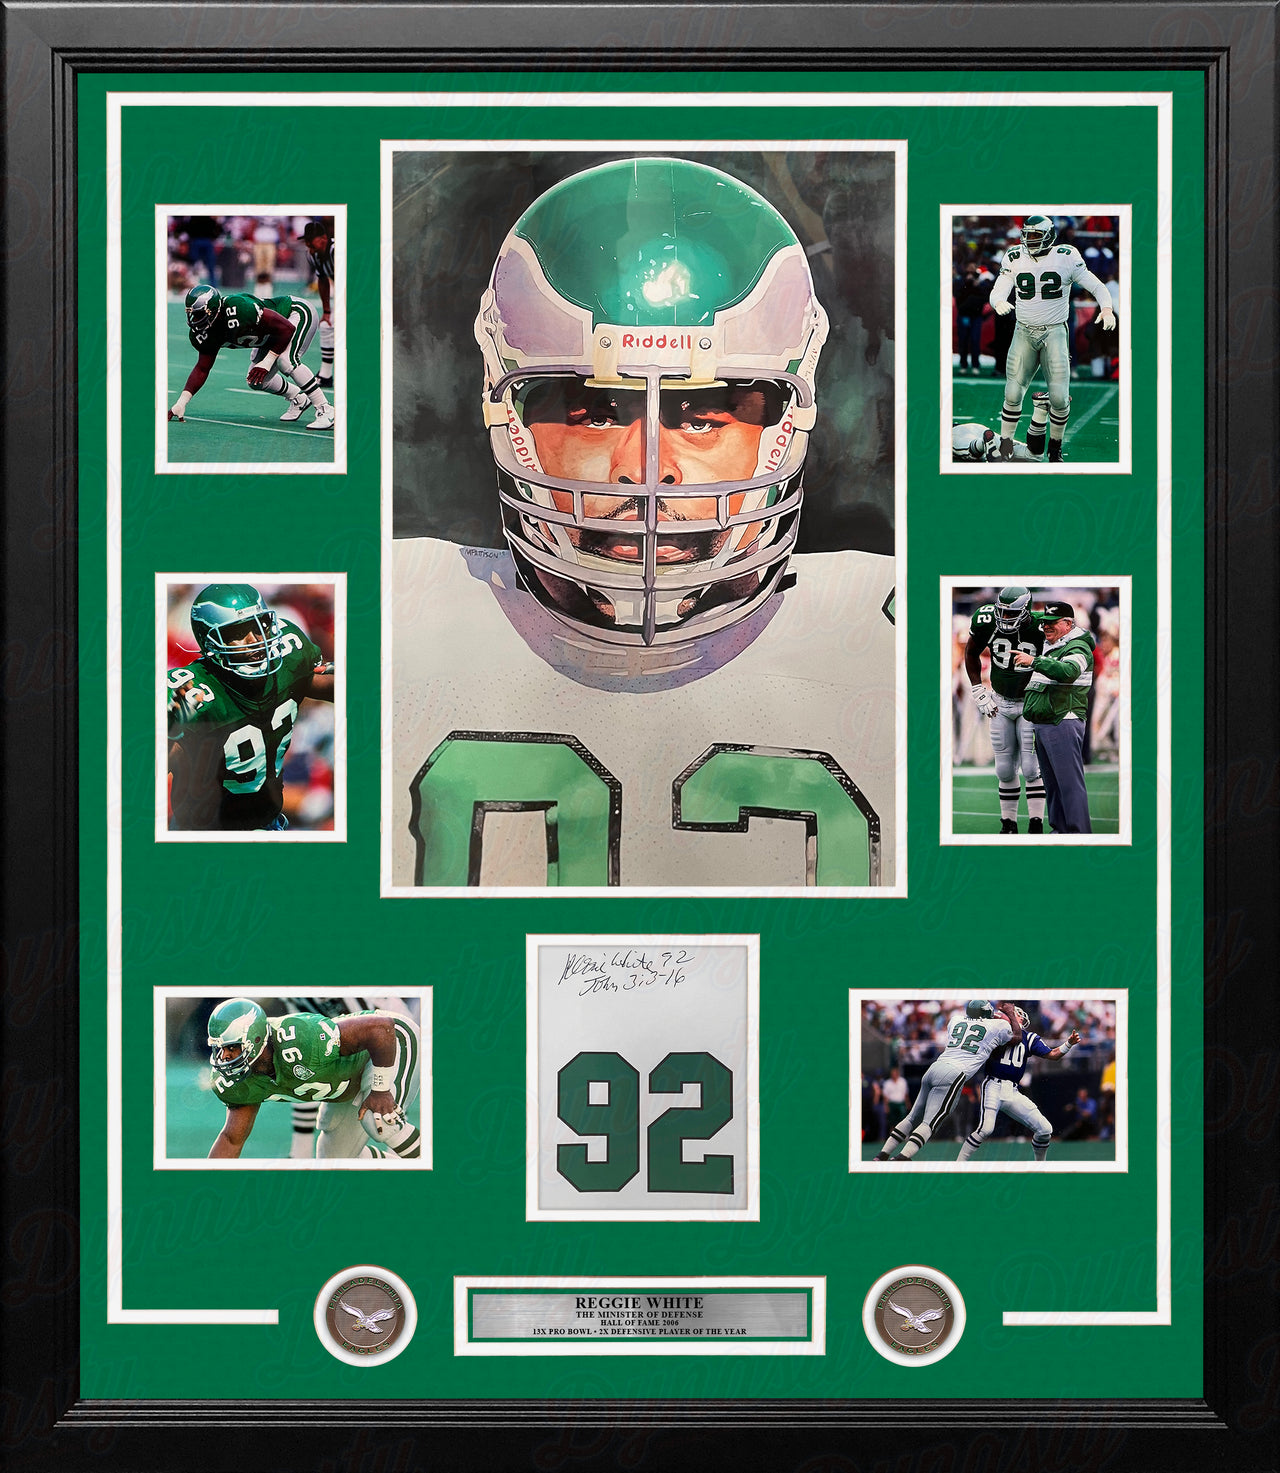 Reggie White Philadelphia Eagles Framed Football Collage with Autographed #92 Photo - Dynasty Sports & Framing 